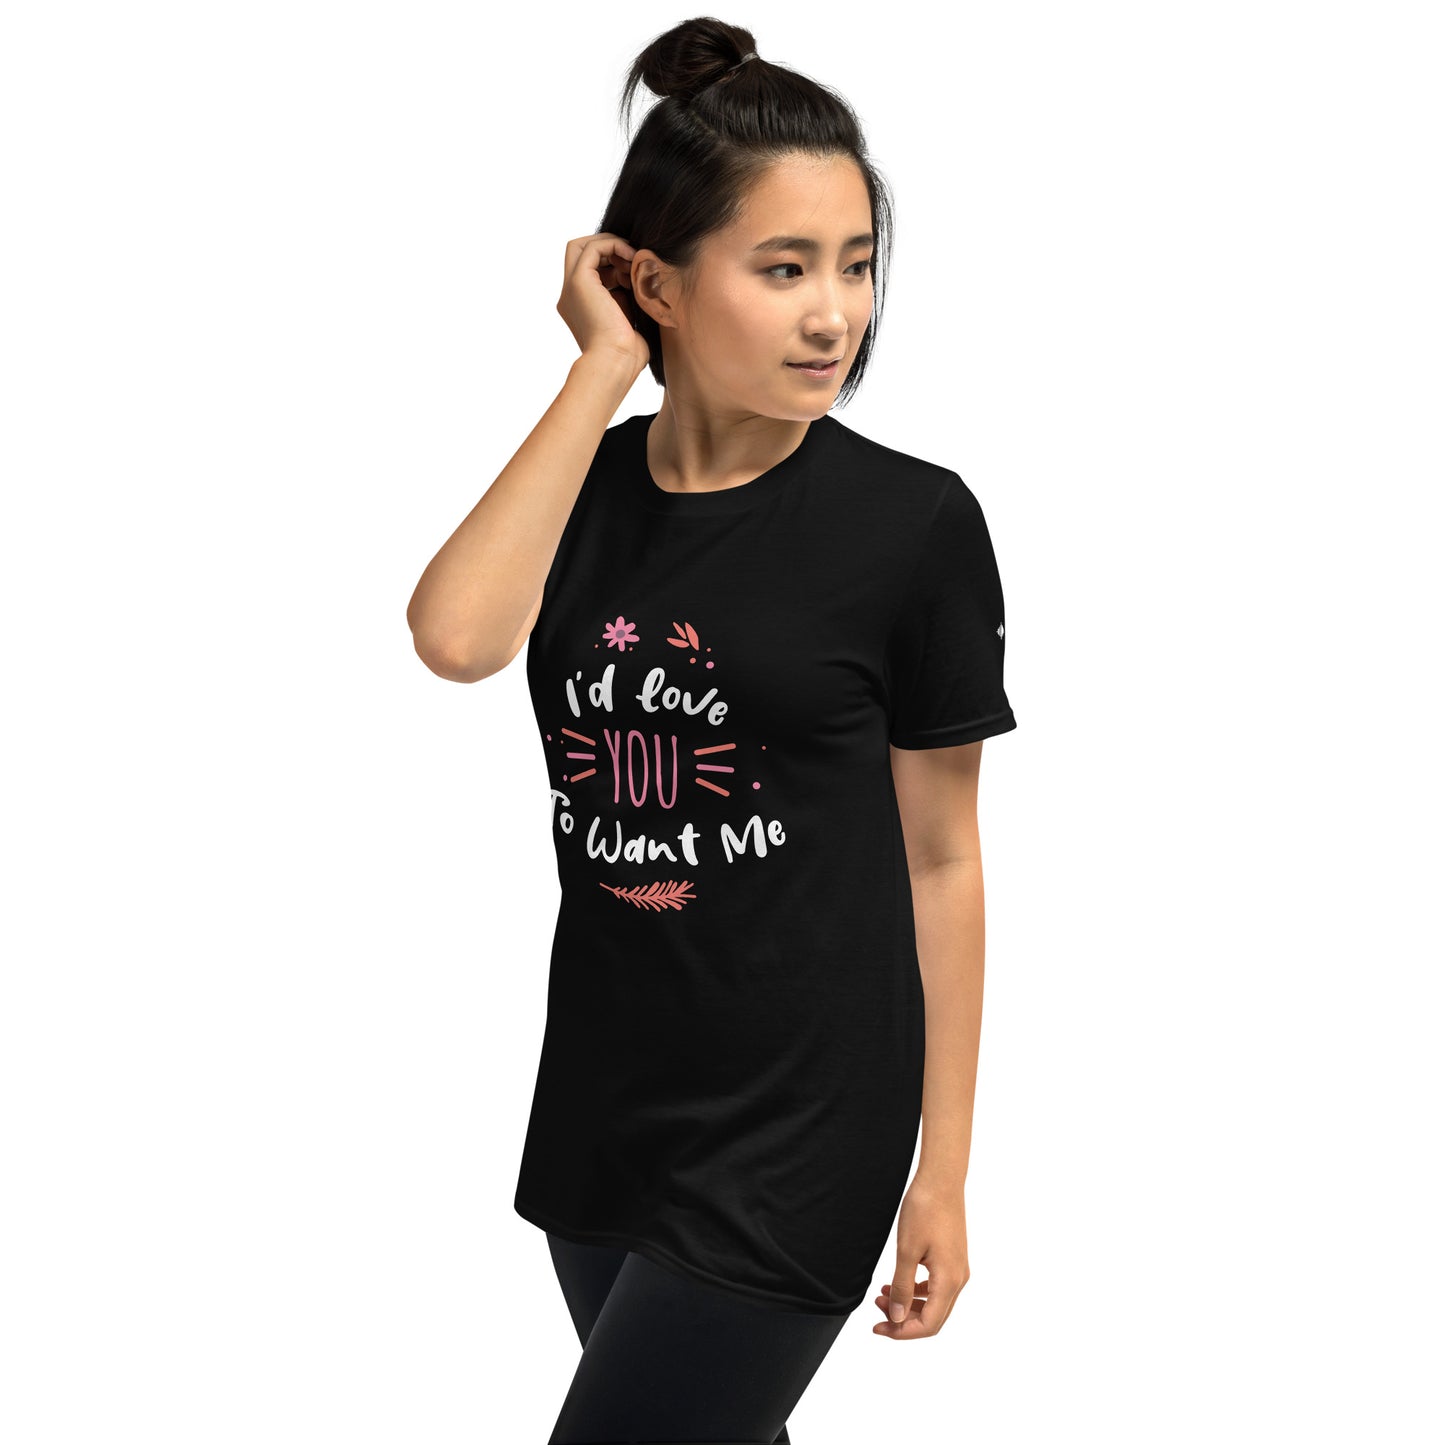 I'd Love You To Want Me Short-Sleeve Unisex T-Shirt (Artistic Design)